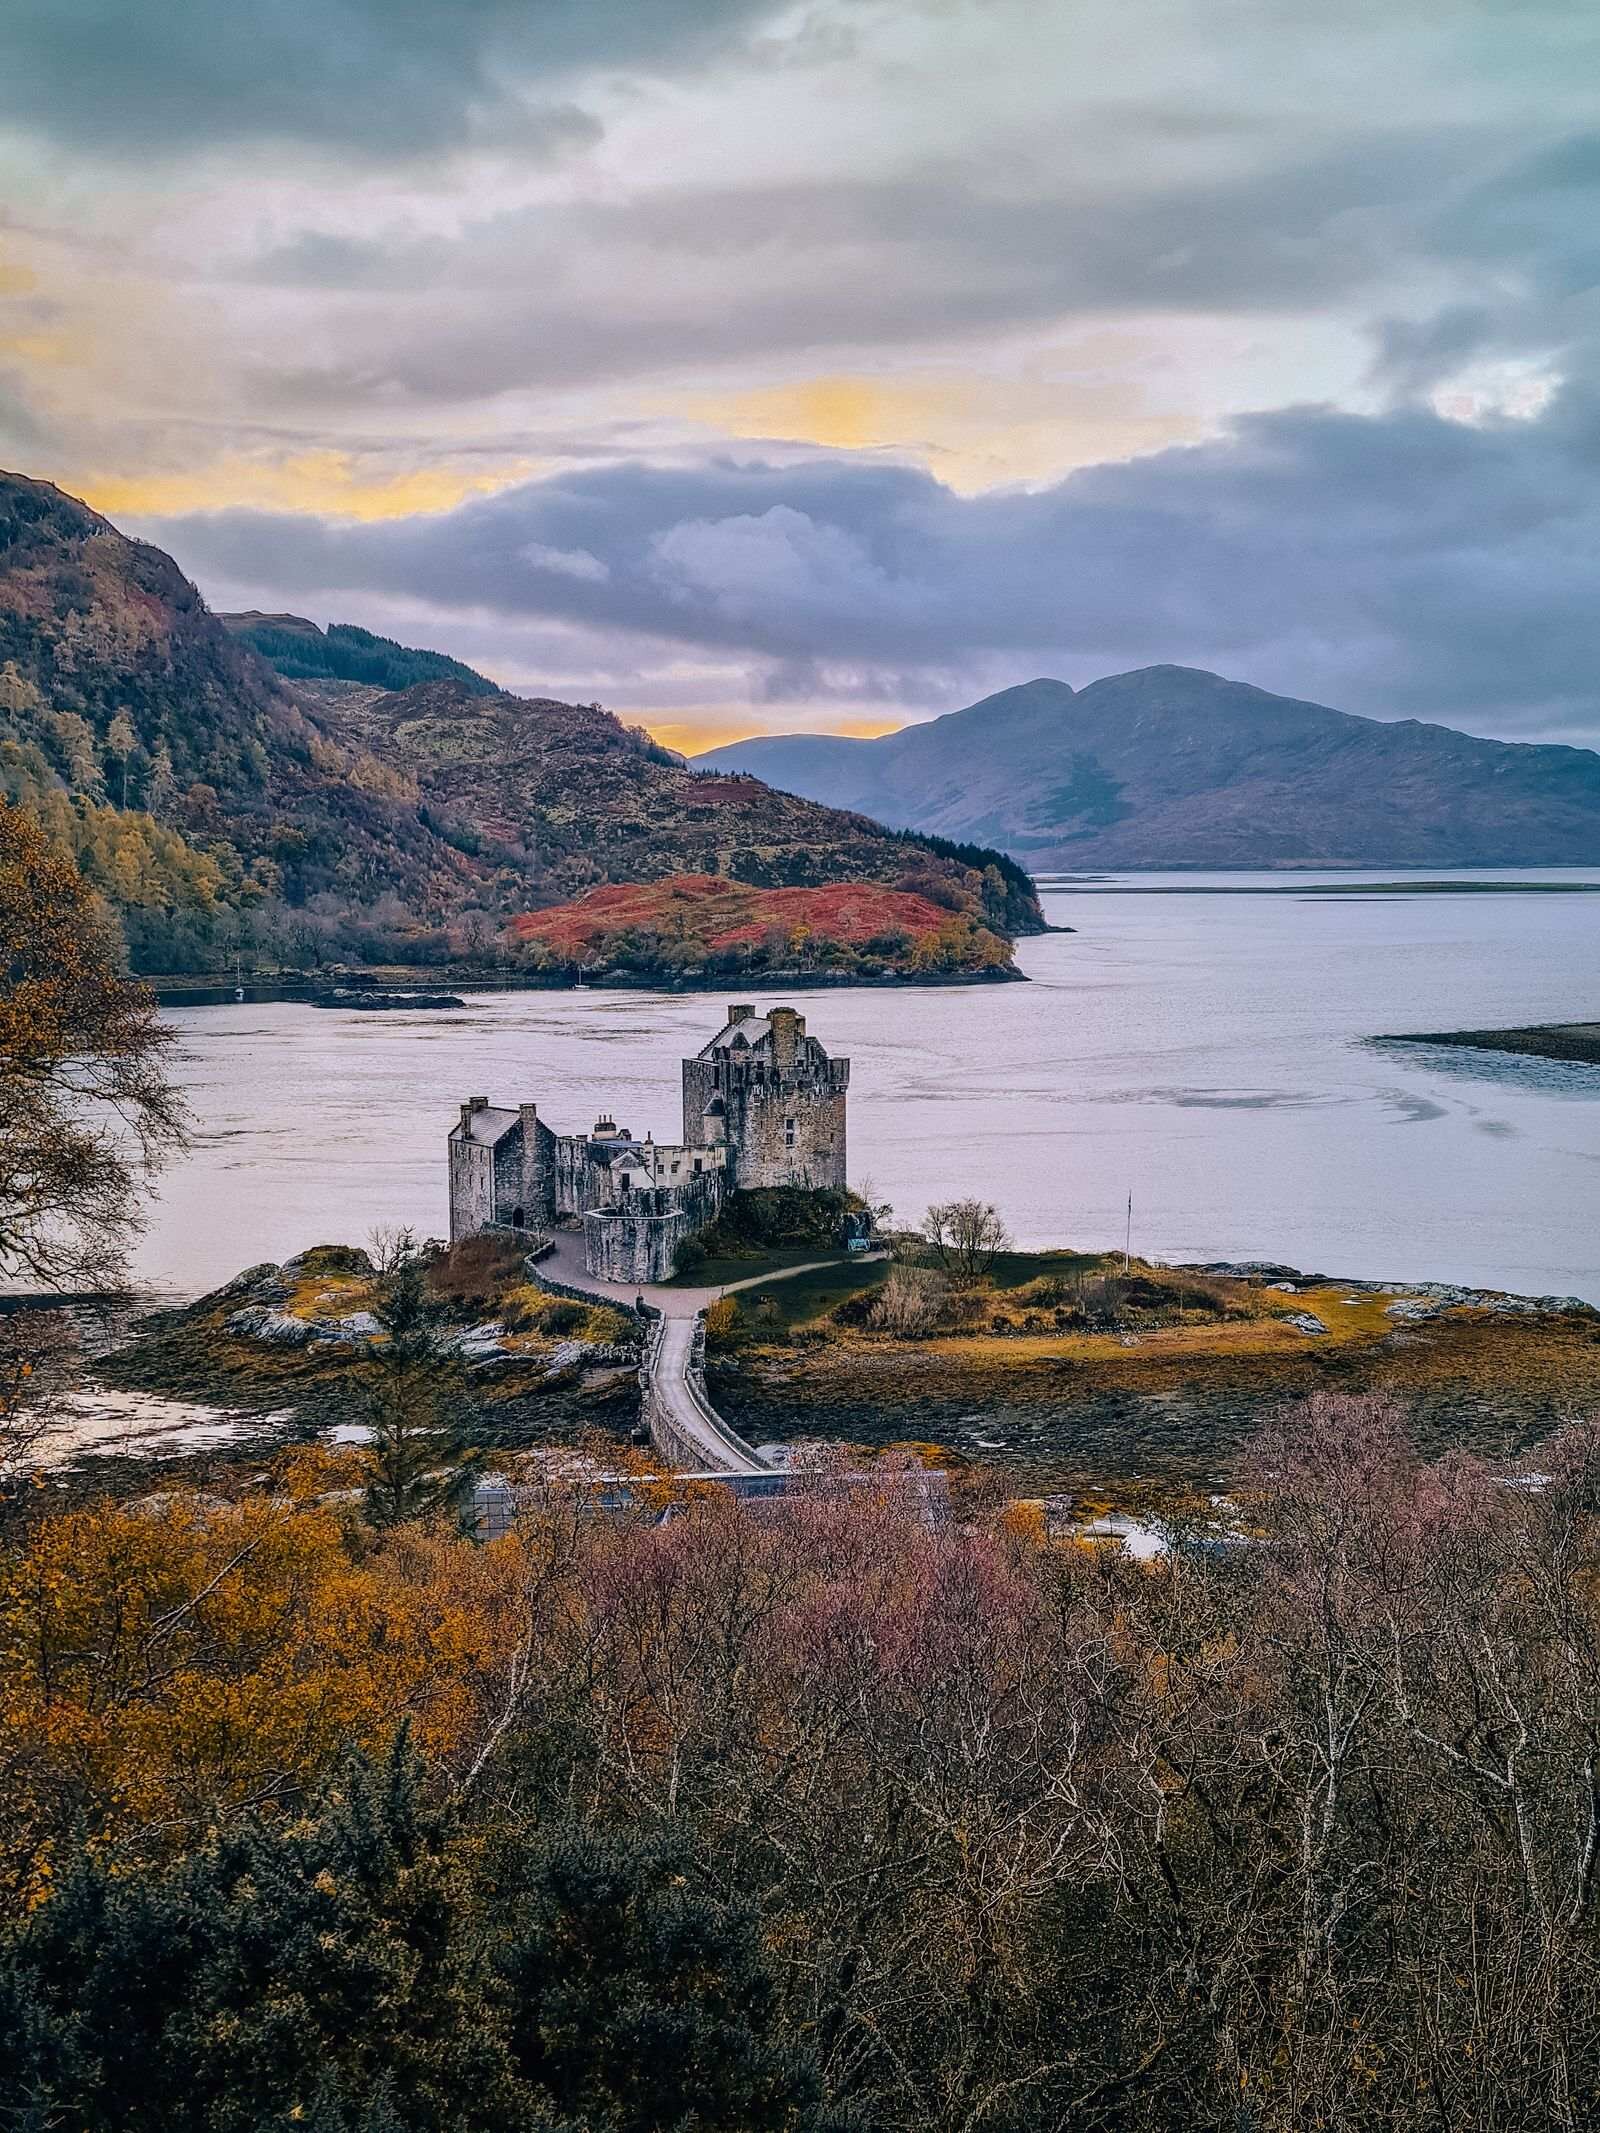 A panoramic view of Eilean Donan Castle - a grey castle on a small island in the lock connected to the mainland by a causeway. Dramatic mountains line the loch behind with low clouds